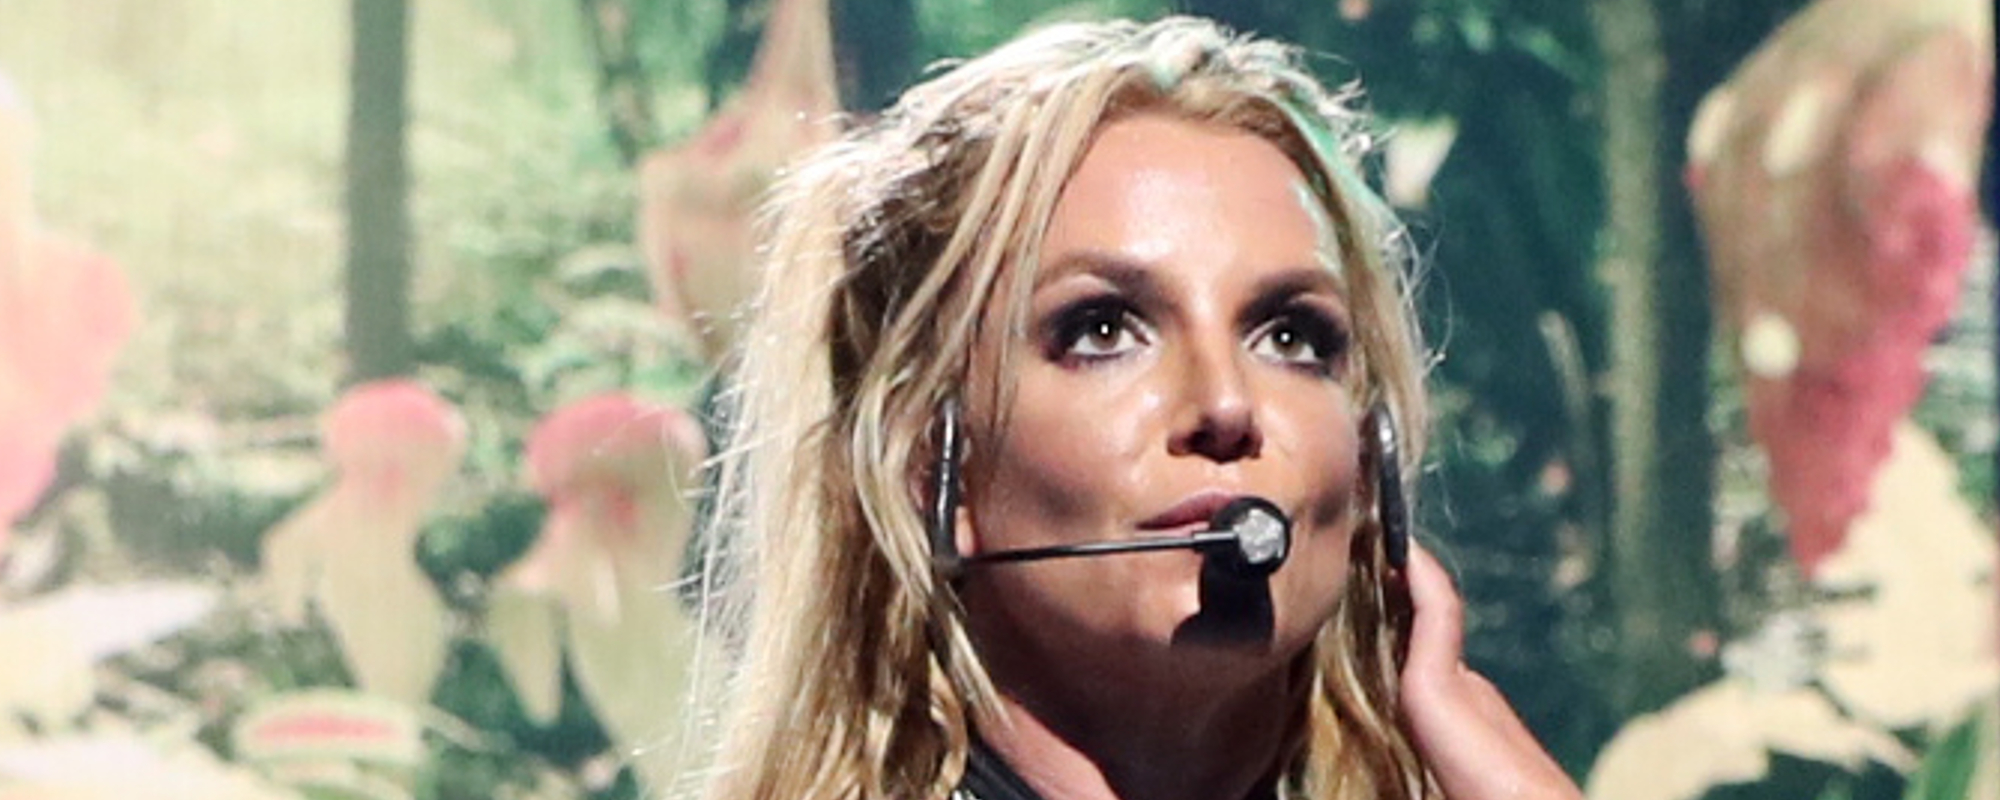 Britney Spears Vows She’ll Never Return to Music Industry—Management Trying to Sway Her